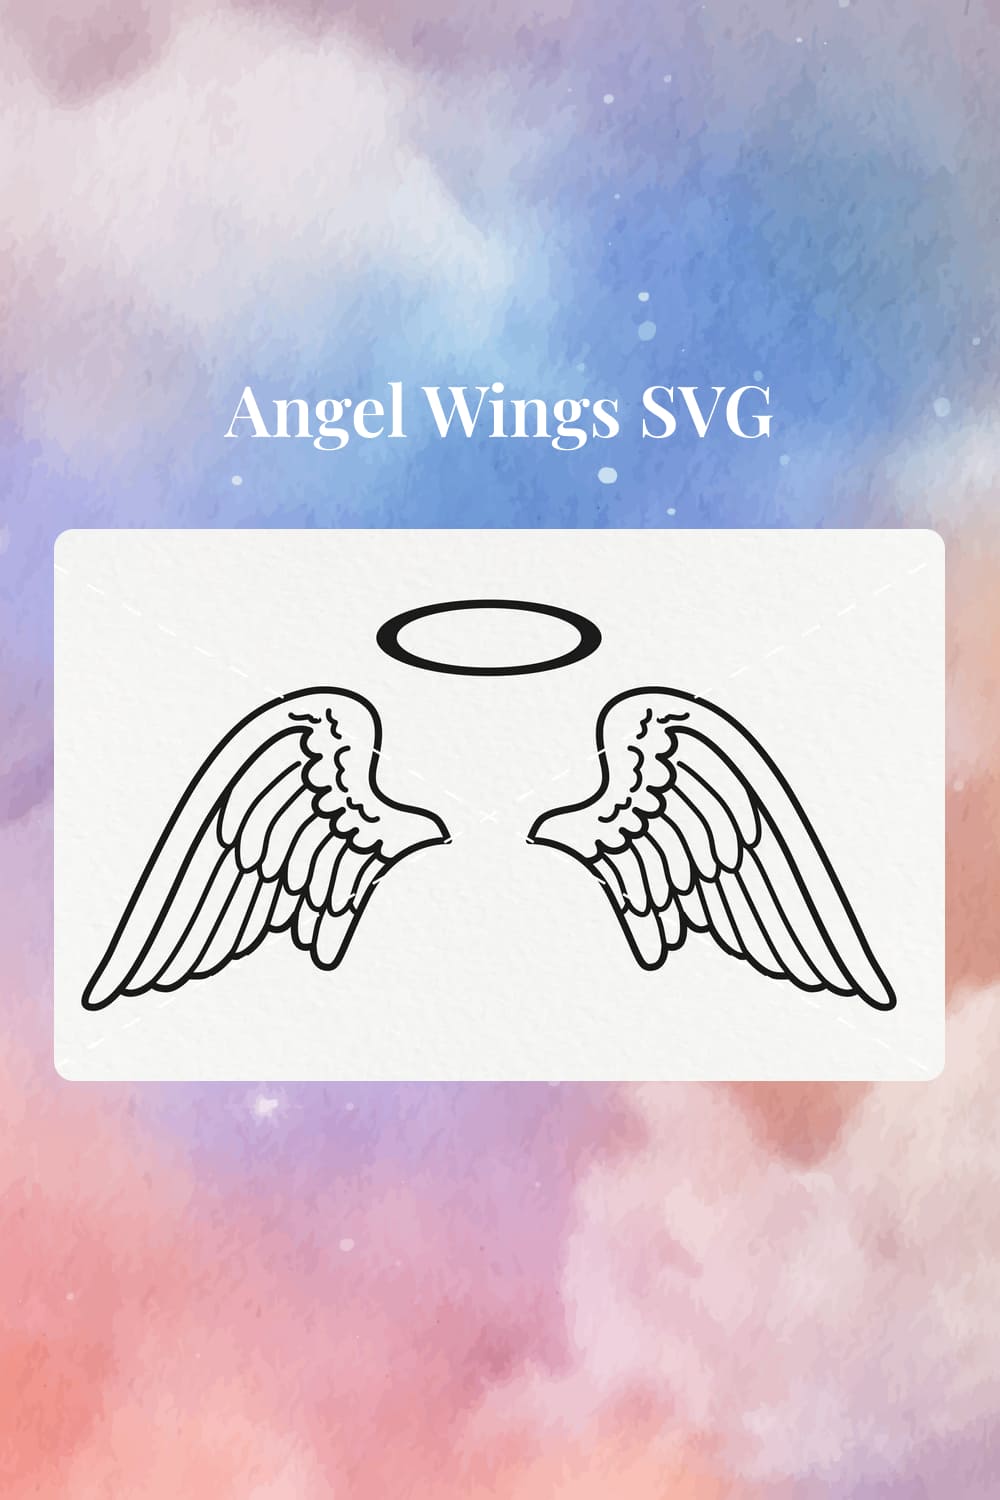 Image of angel wings in black and white and with a halo.